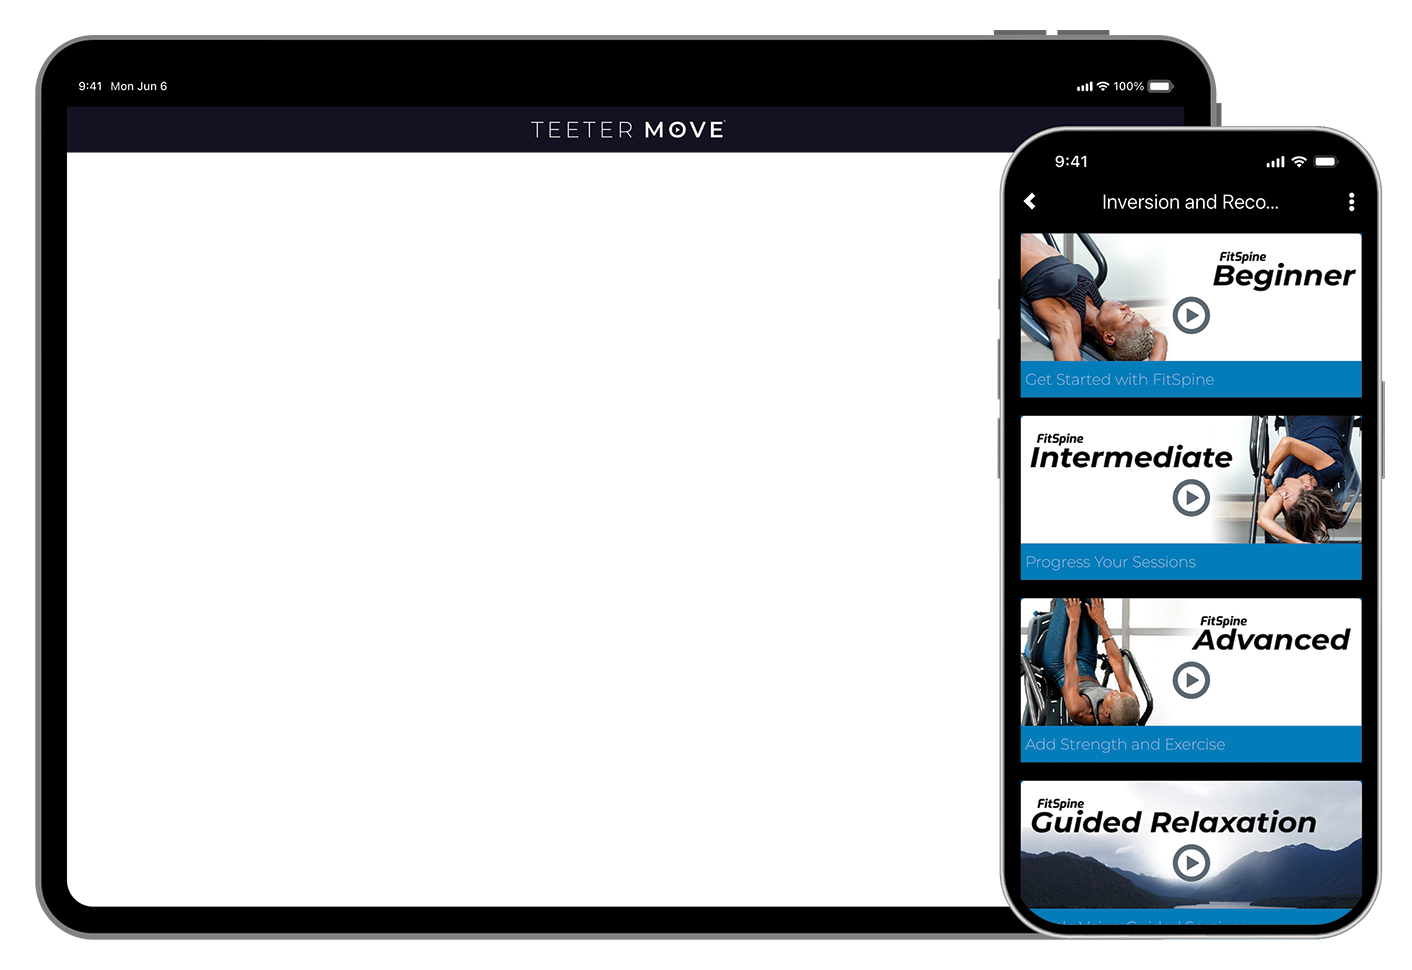 Teeter Move App on Phone and Tablet